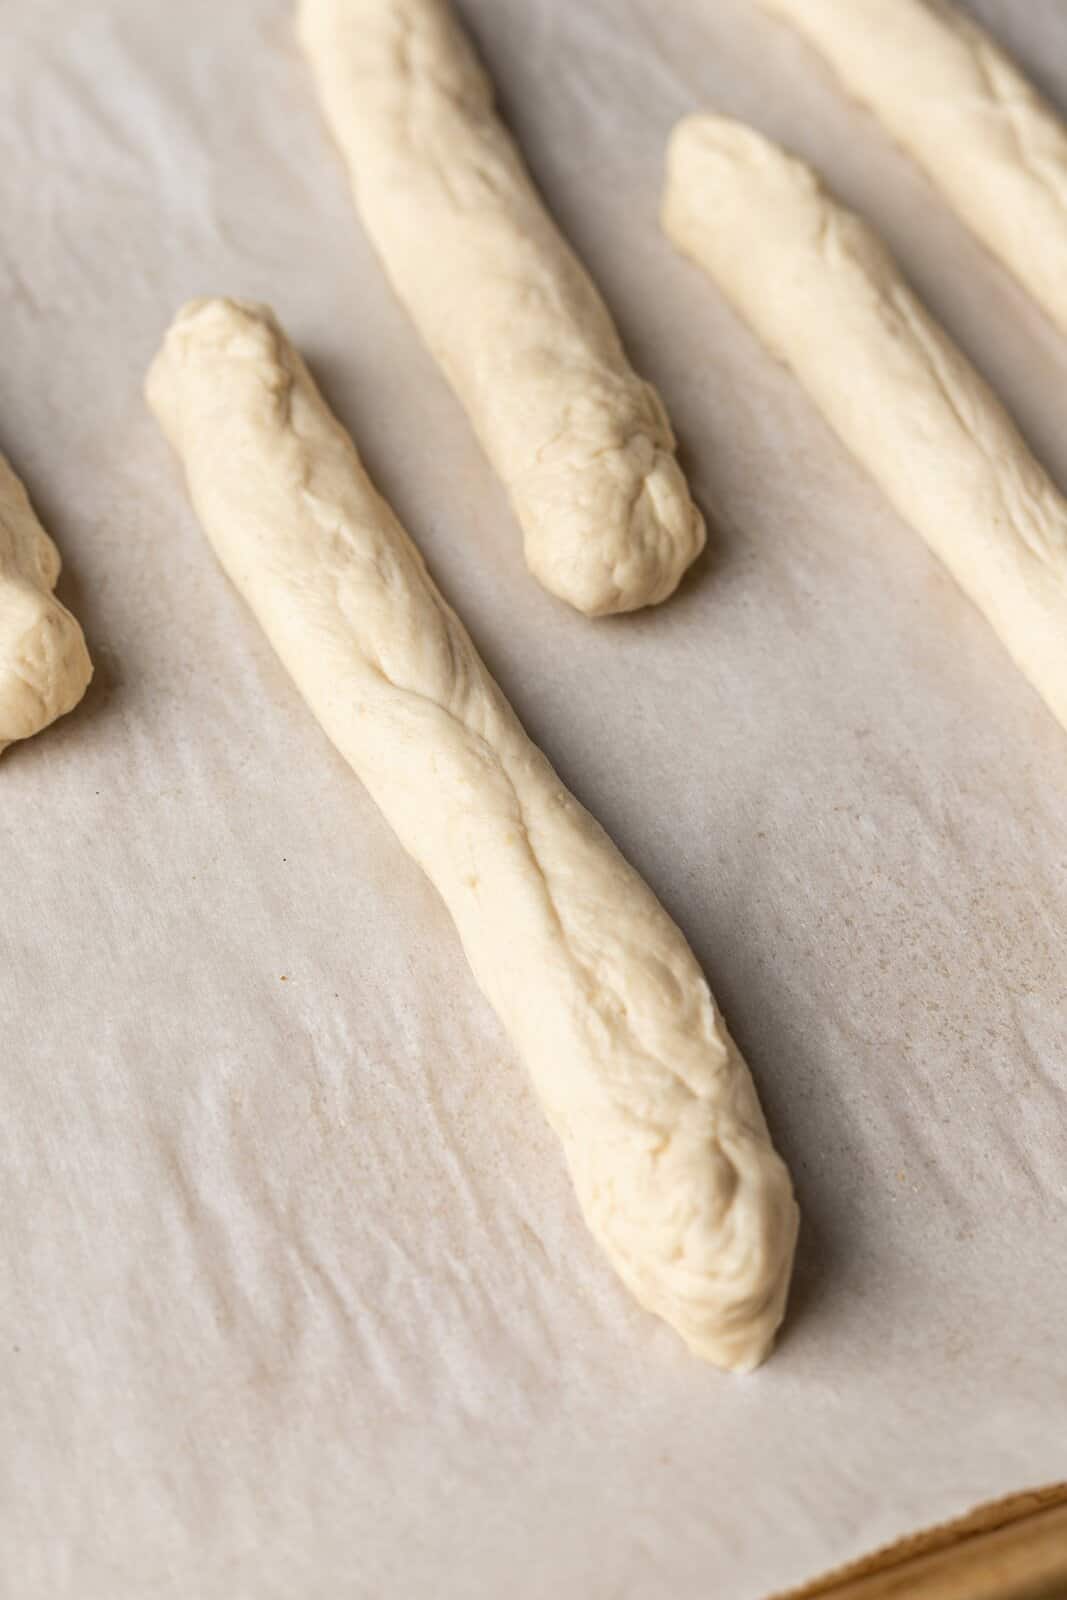 Dough rolled out into long breadsticks on parchment lined baking sheet.